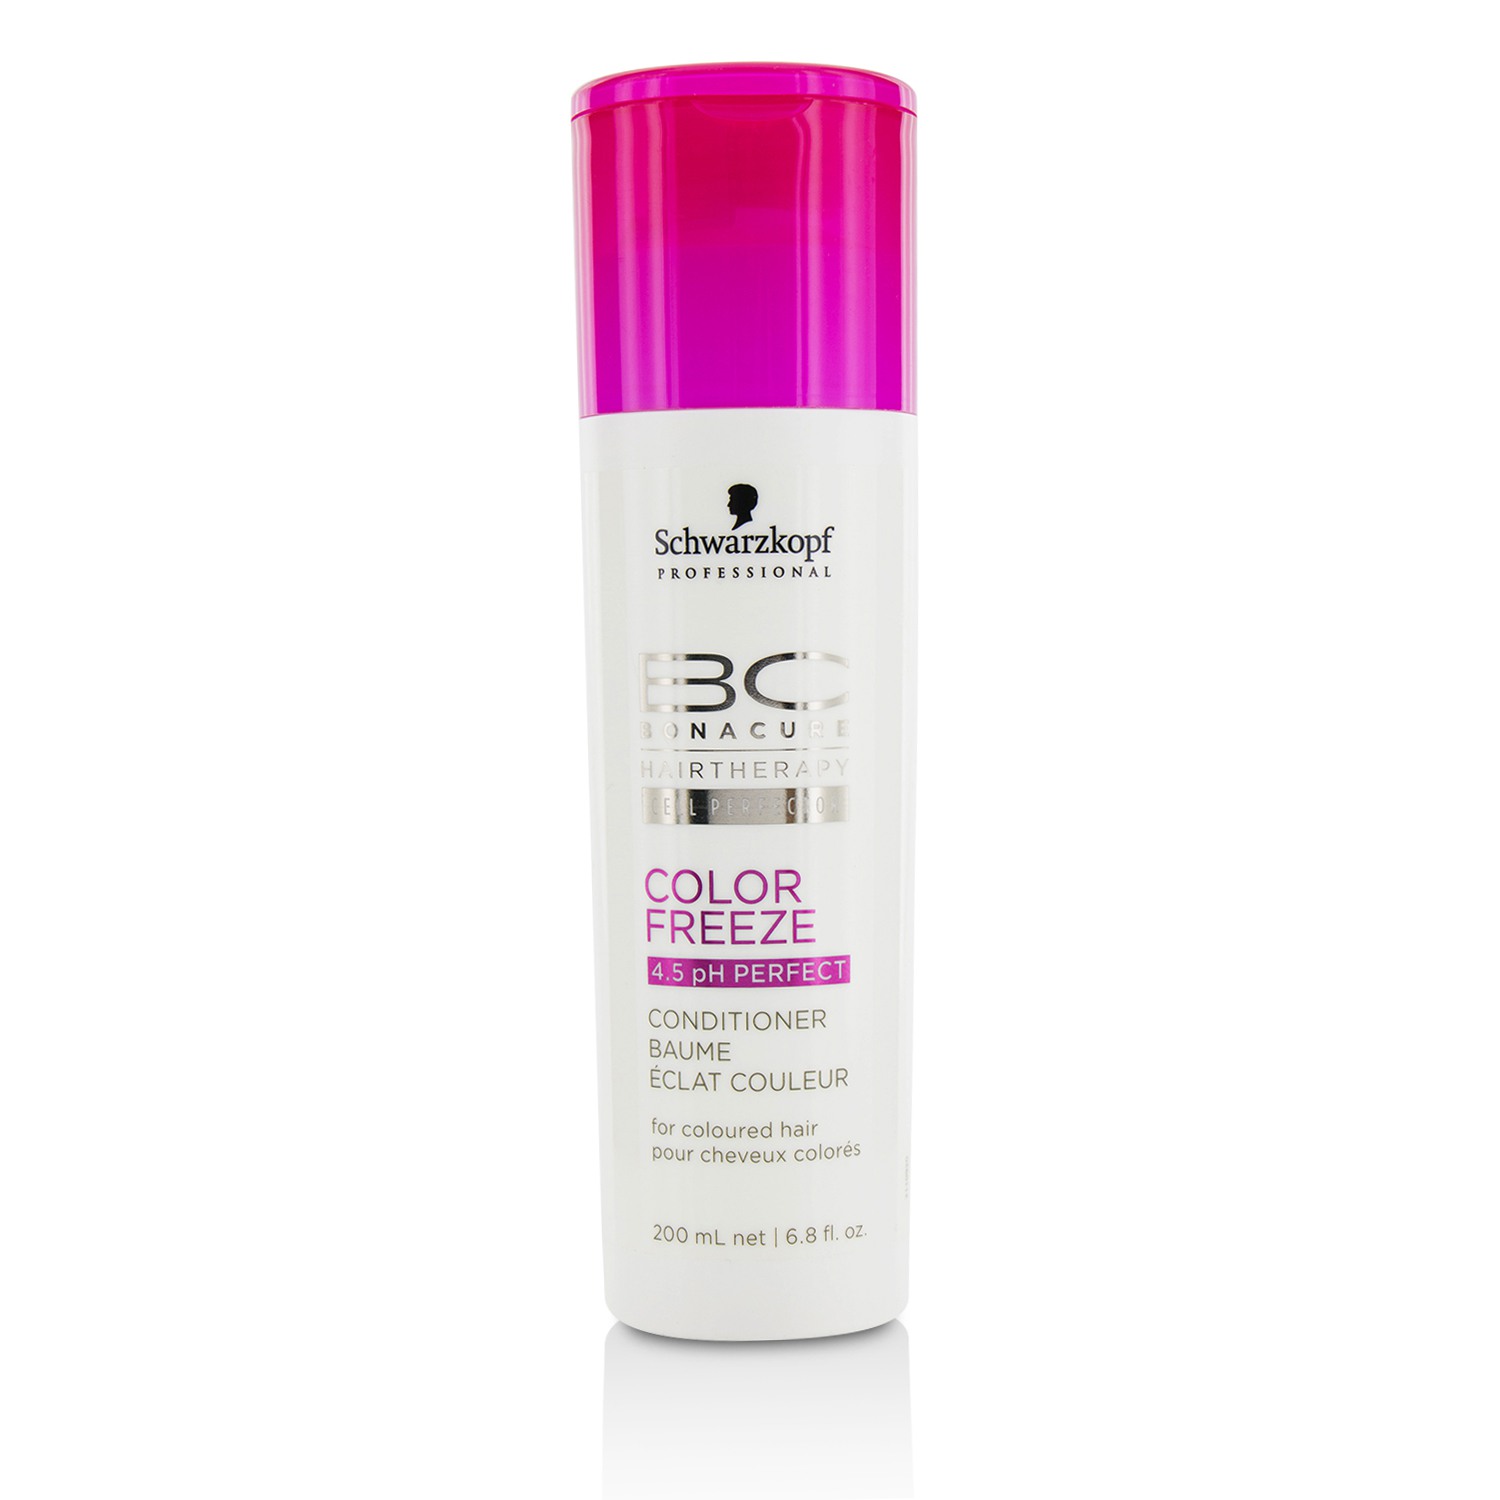 BC Color Freeze pH 4.5 Perfect Conditioner (For Coloured Hair) Schwarzkopf Image